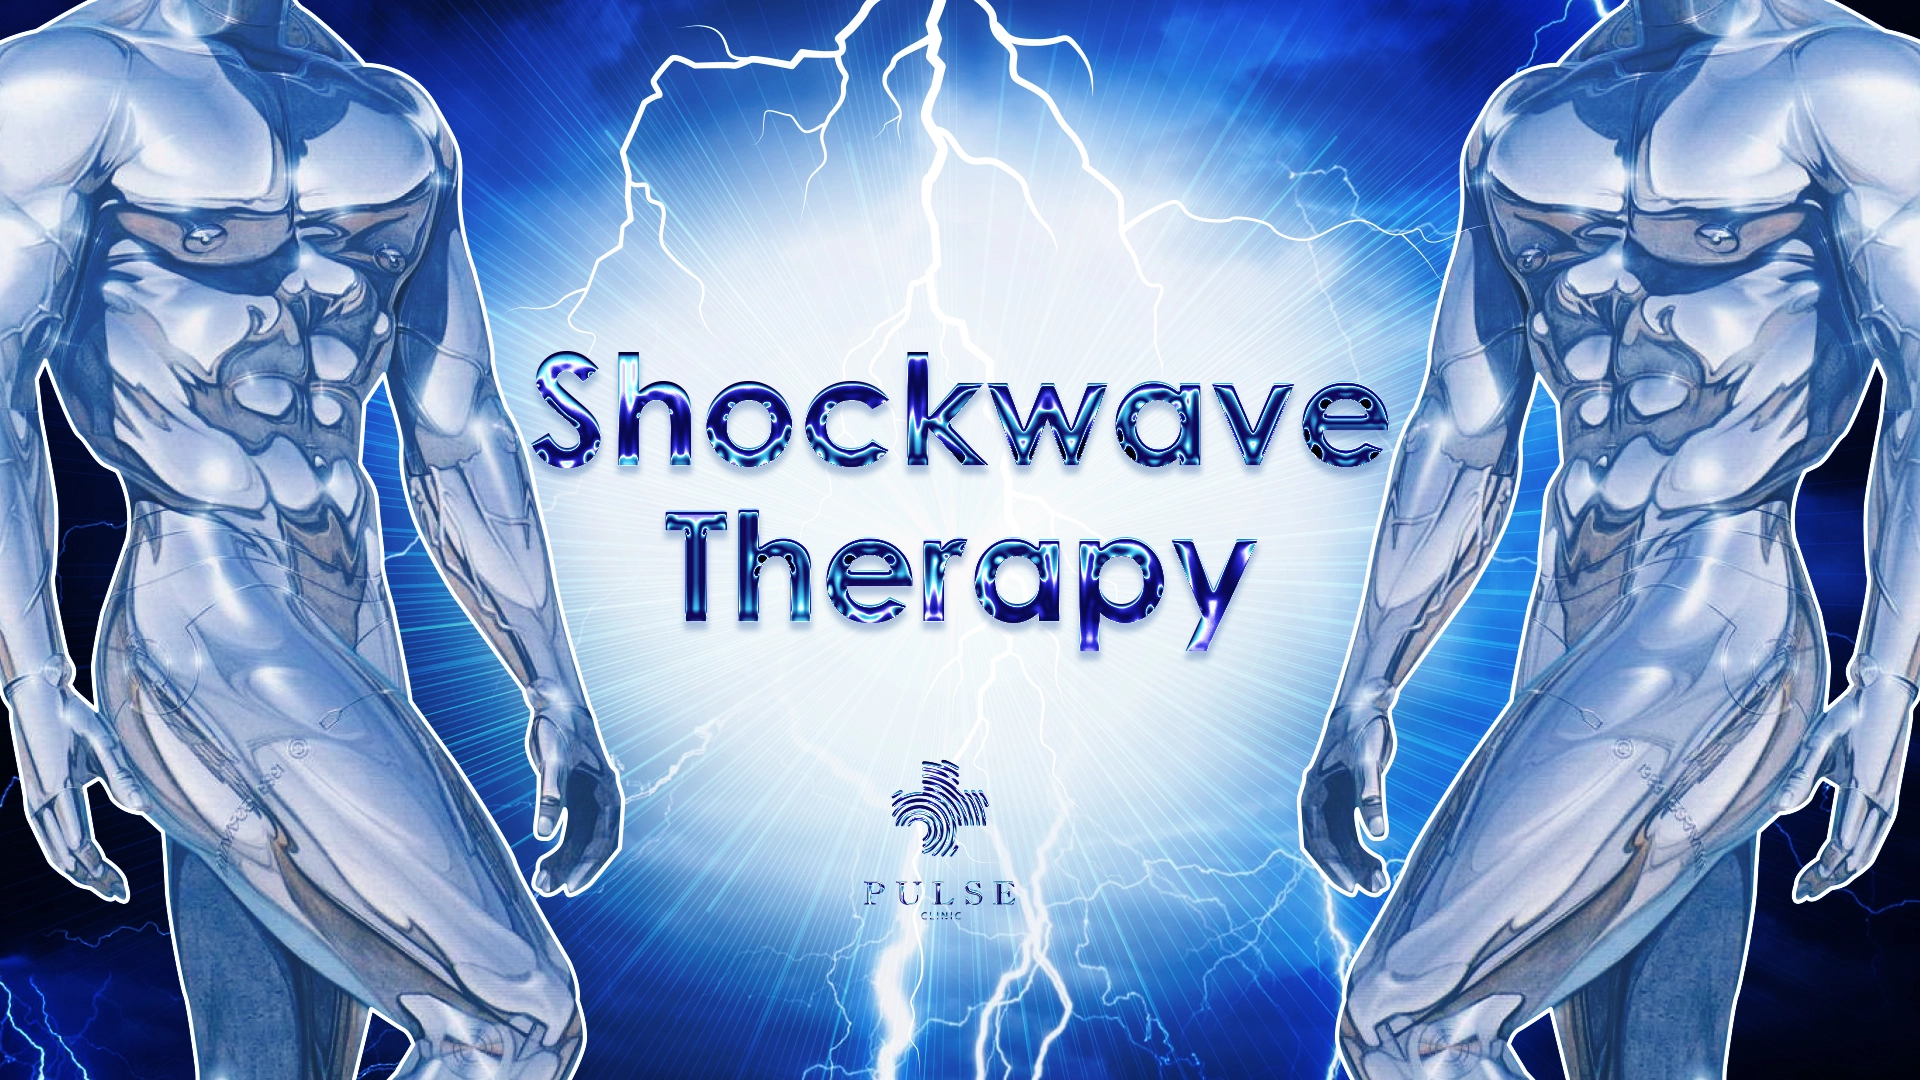 Shockwave Therapy for Erectile Dysfunction: Does It Work?